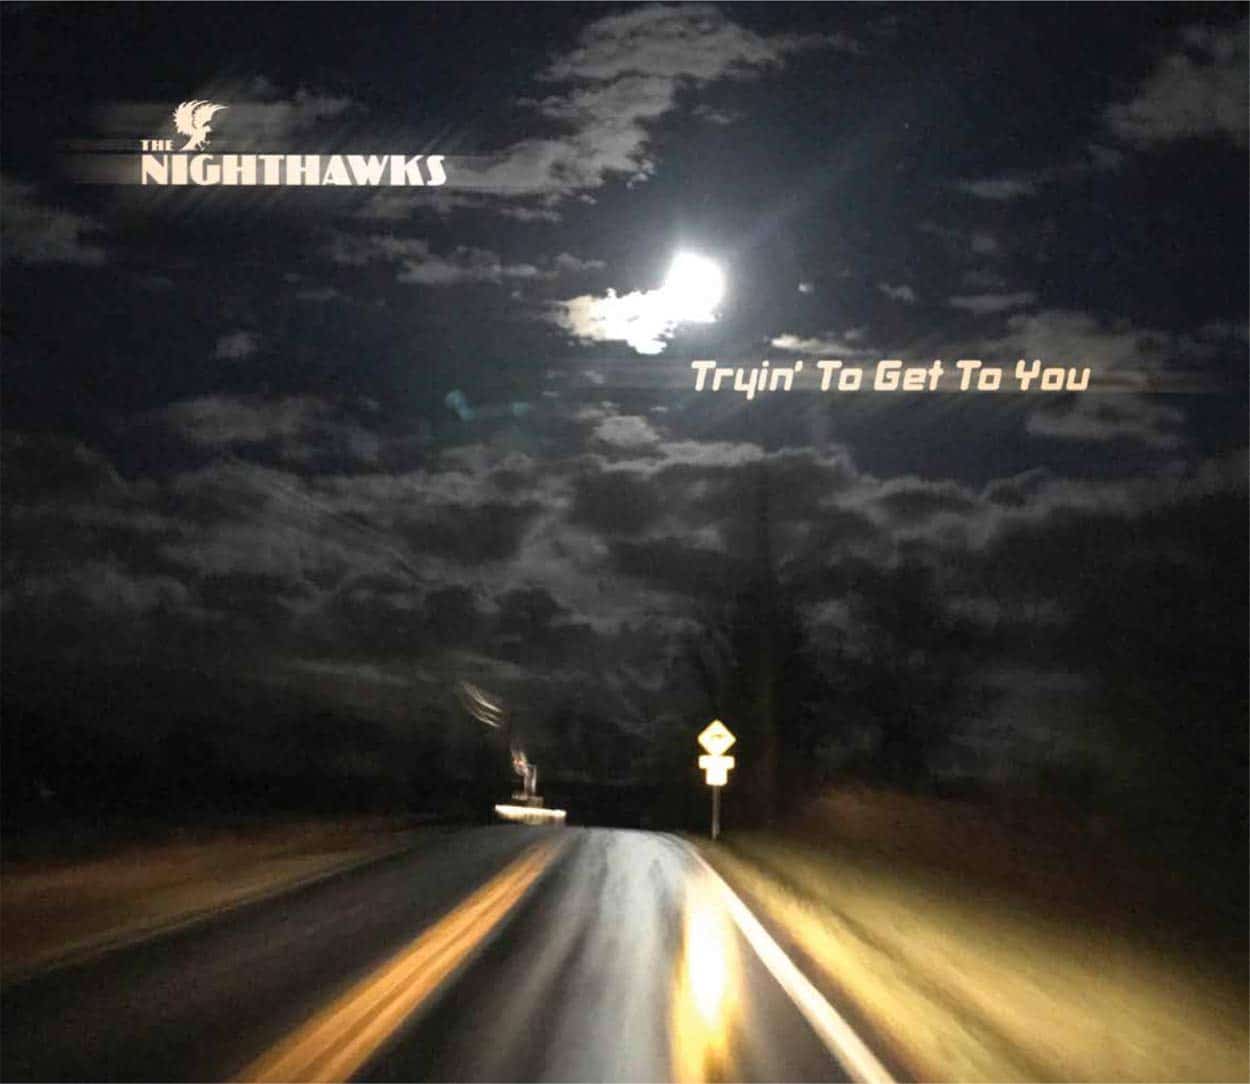 THE NIGHTHAWKS - Tryin' To Get To You